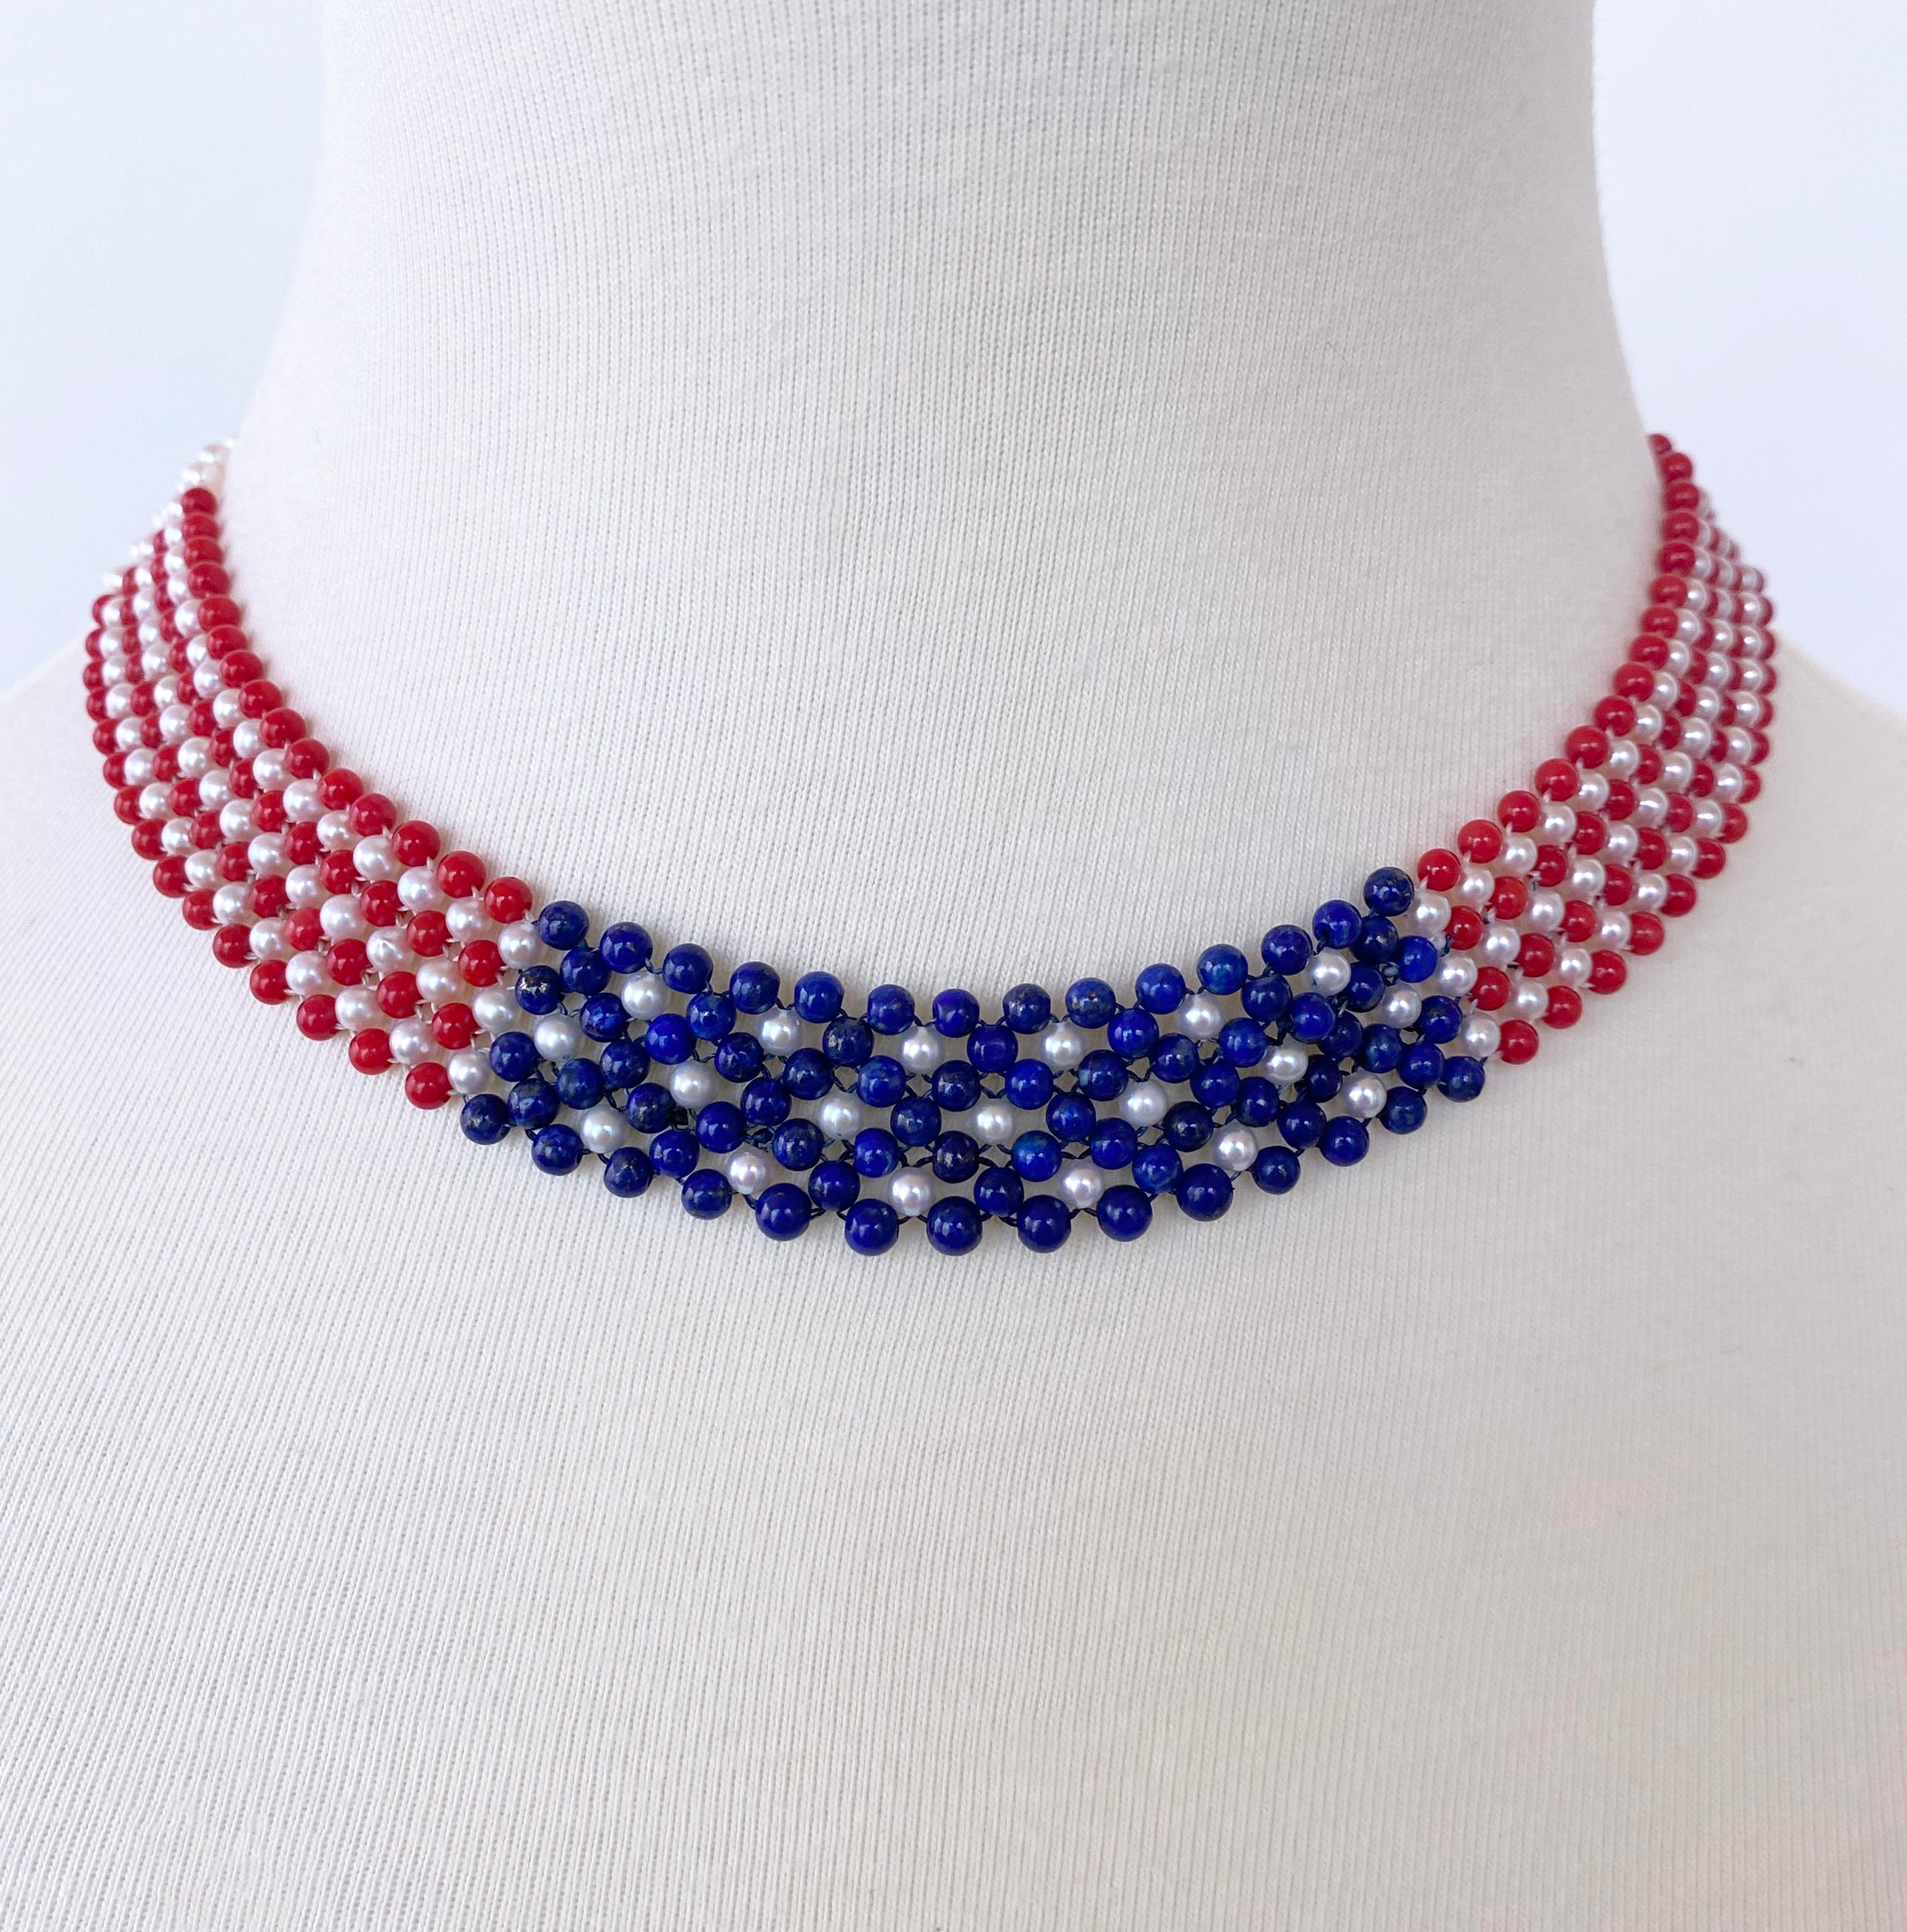 Marina J. Woven Pearl, Coral, & Lapis American Flag Necklace with 14K Gold For Sale 4